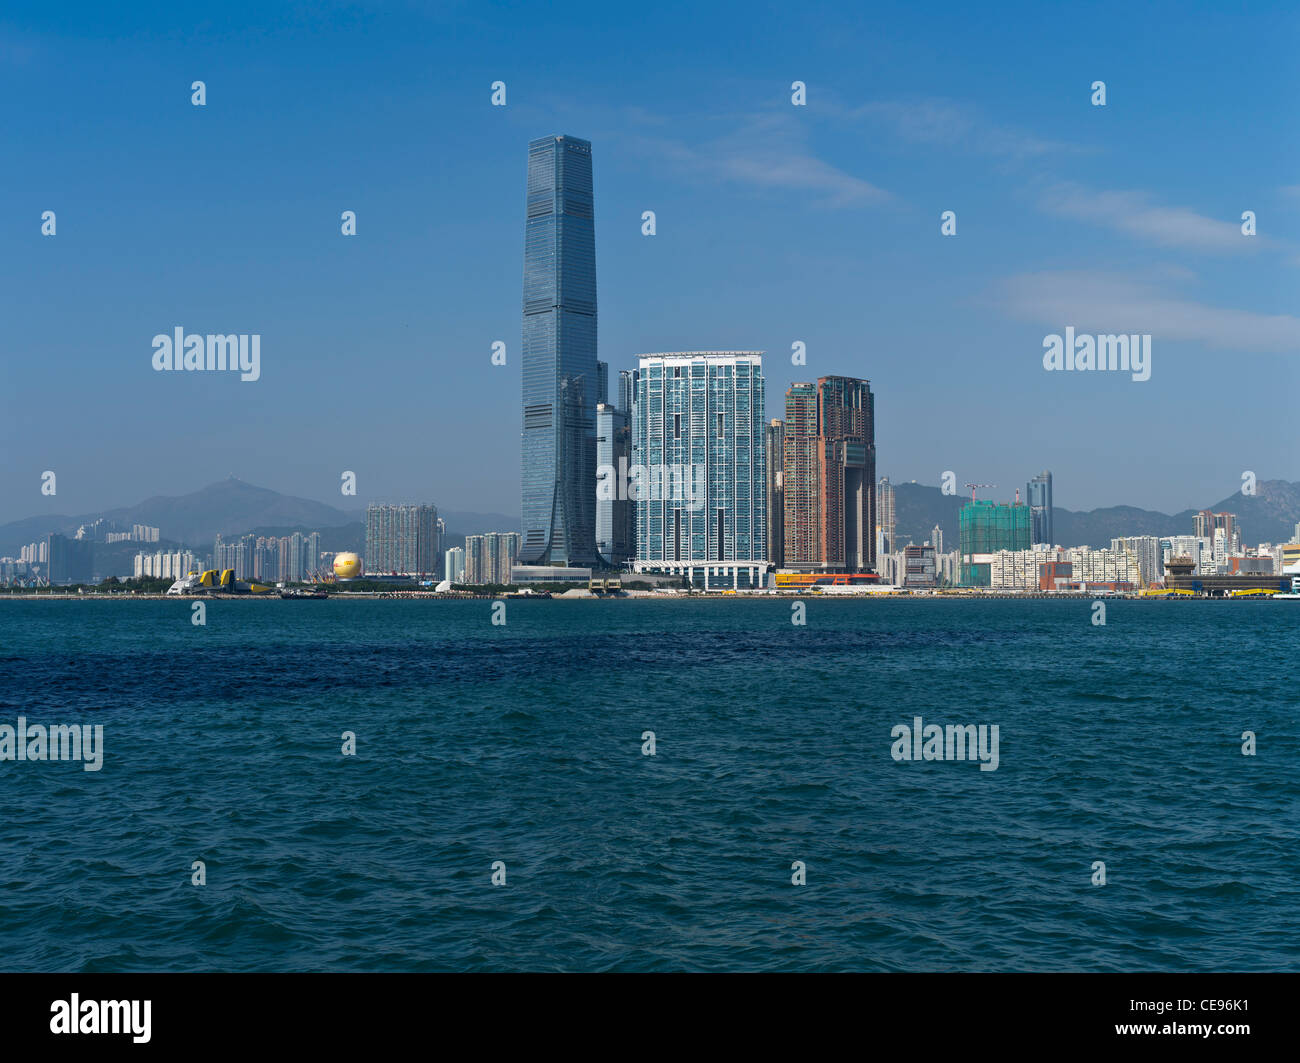 Dh WEST KOWLOON HONG KONG ICC tower harbour waterfront grattacielo skyline edifici cityscape giorno sea Foto Stock